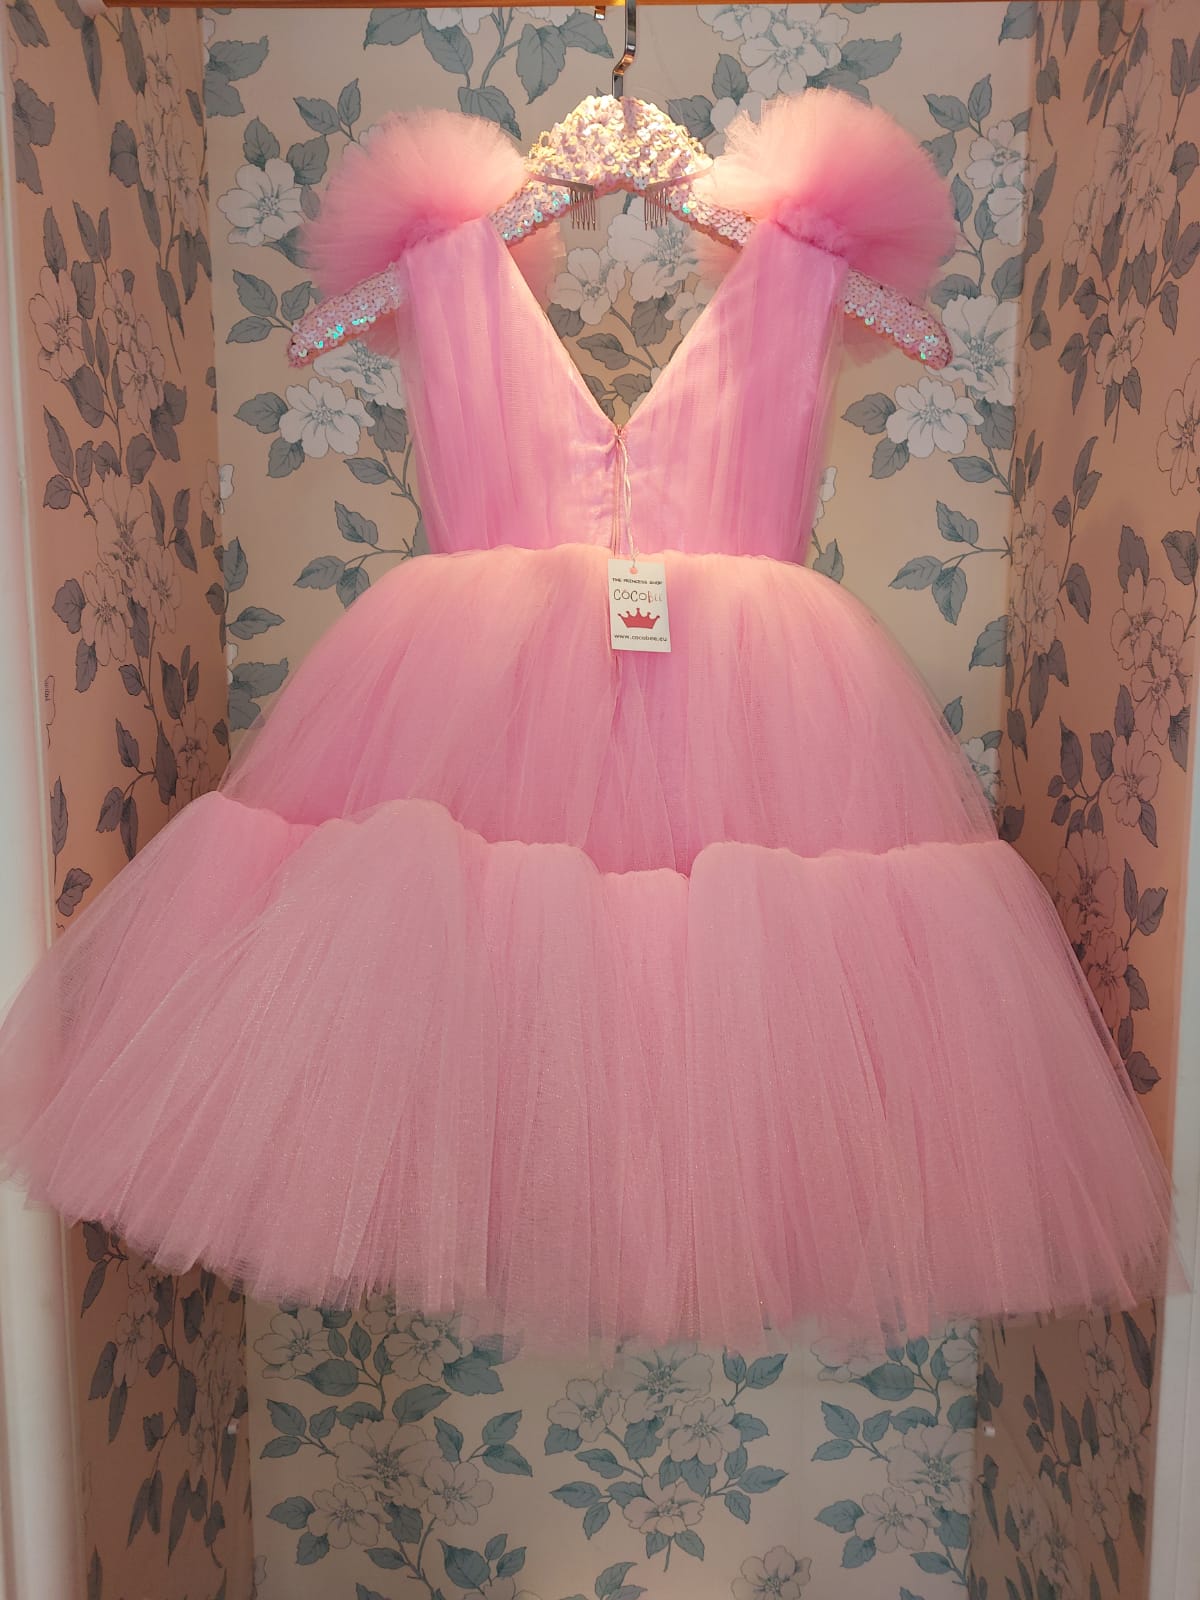 Pink Tulle Girls Party Dress